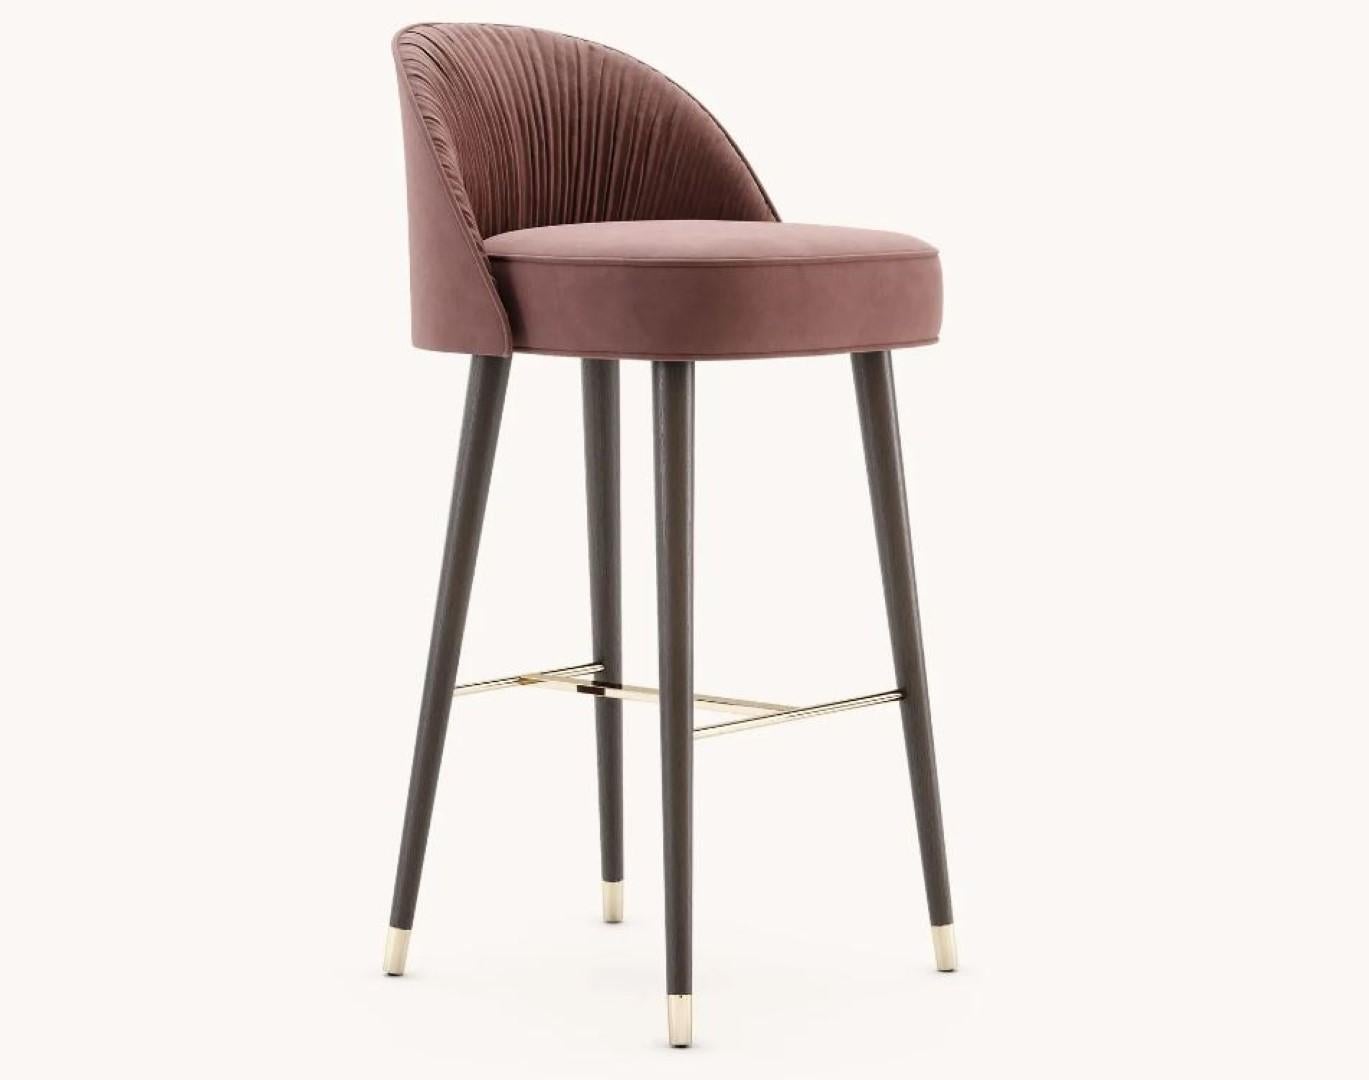 Camille bar chair with metal cups by Domkapa
Materials: Microfibers, Fumé stained beech, gold polished stainless steel.
Dimensions: W 53 x D 52 x H 101 cm. 
Also available in different materials.

Designed to make a statement, Camille bar and